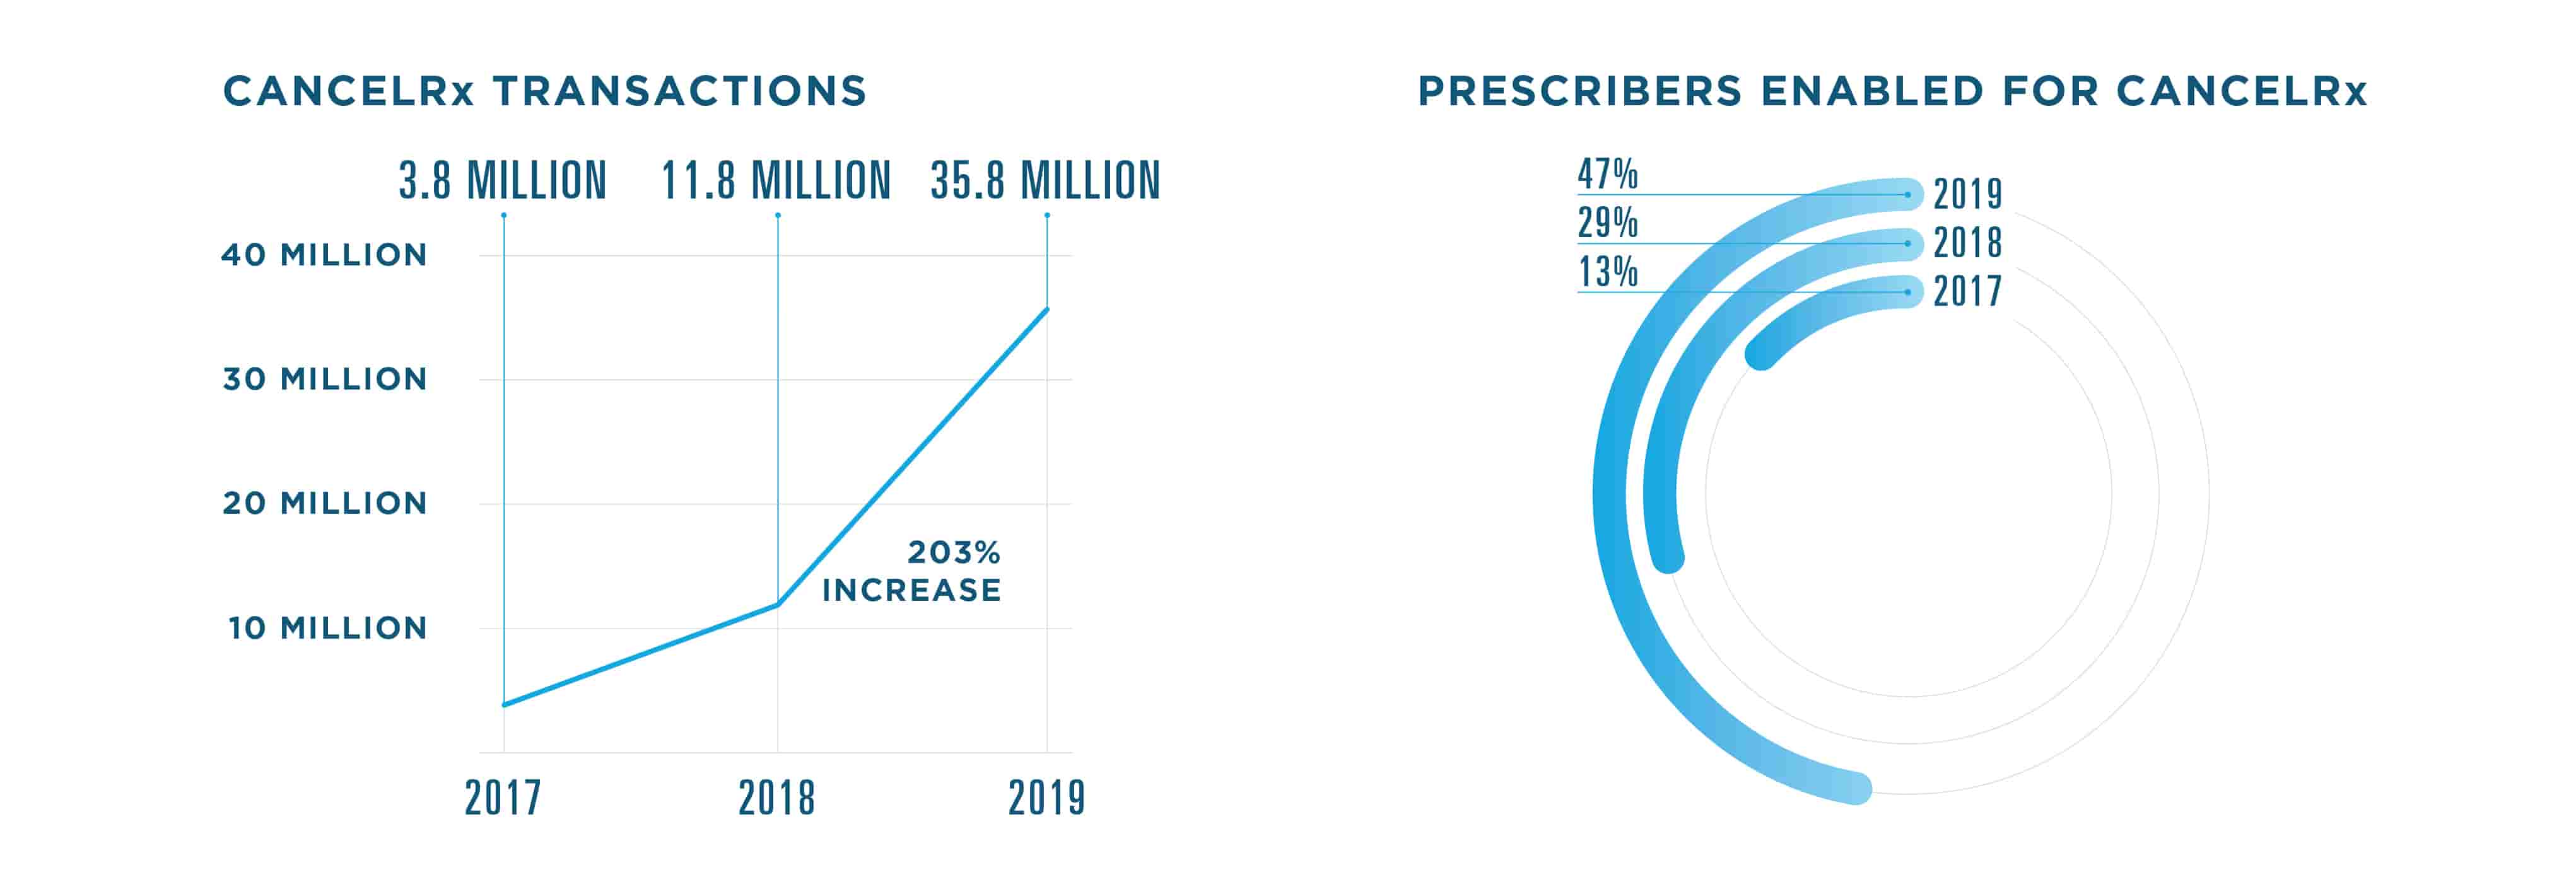 CancelRx transactions increased 203% in 2019, totalling 35.8 million. There were 11.8 million CancelRx transactions in 2018 and 3.8 million in 2017. In 2019, 47% of prescribers were enabled for CancelRx, compared to 29% in 2018 and 13% in 2017.